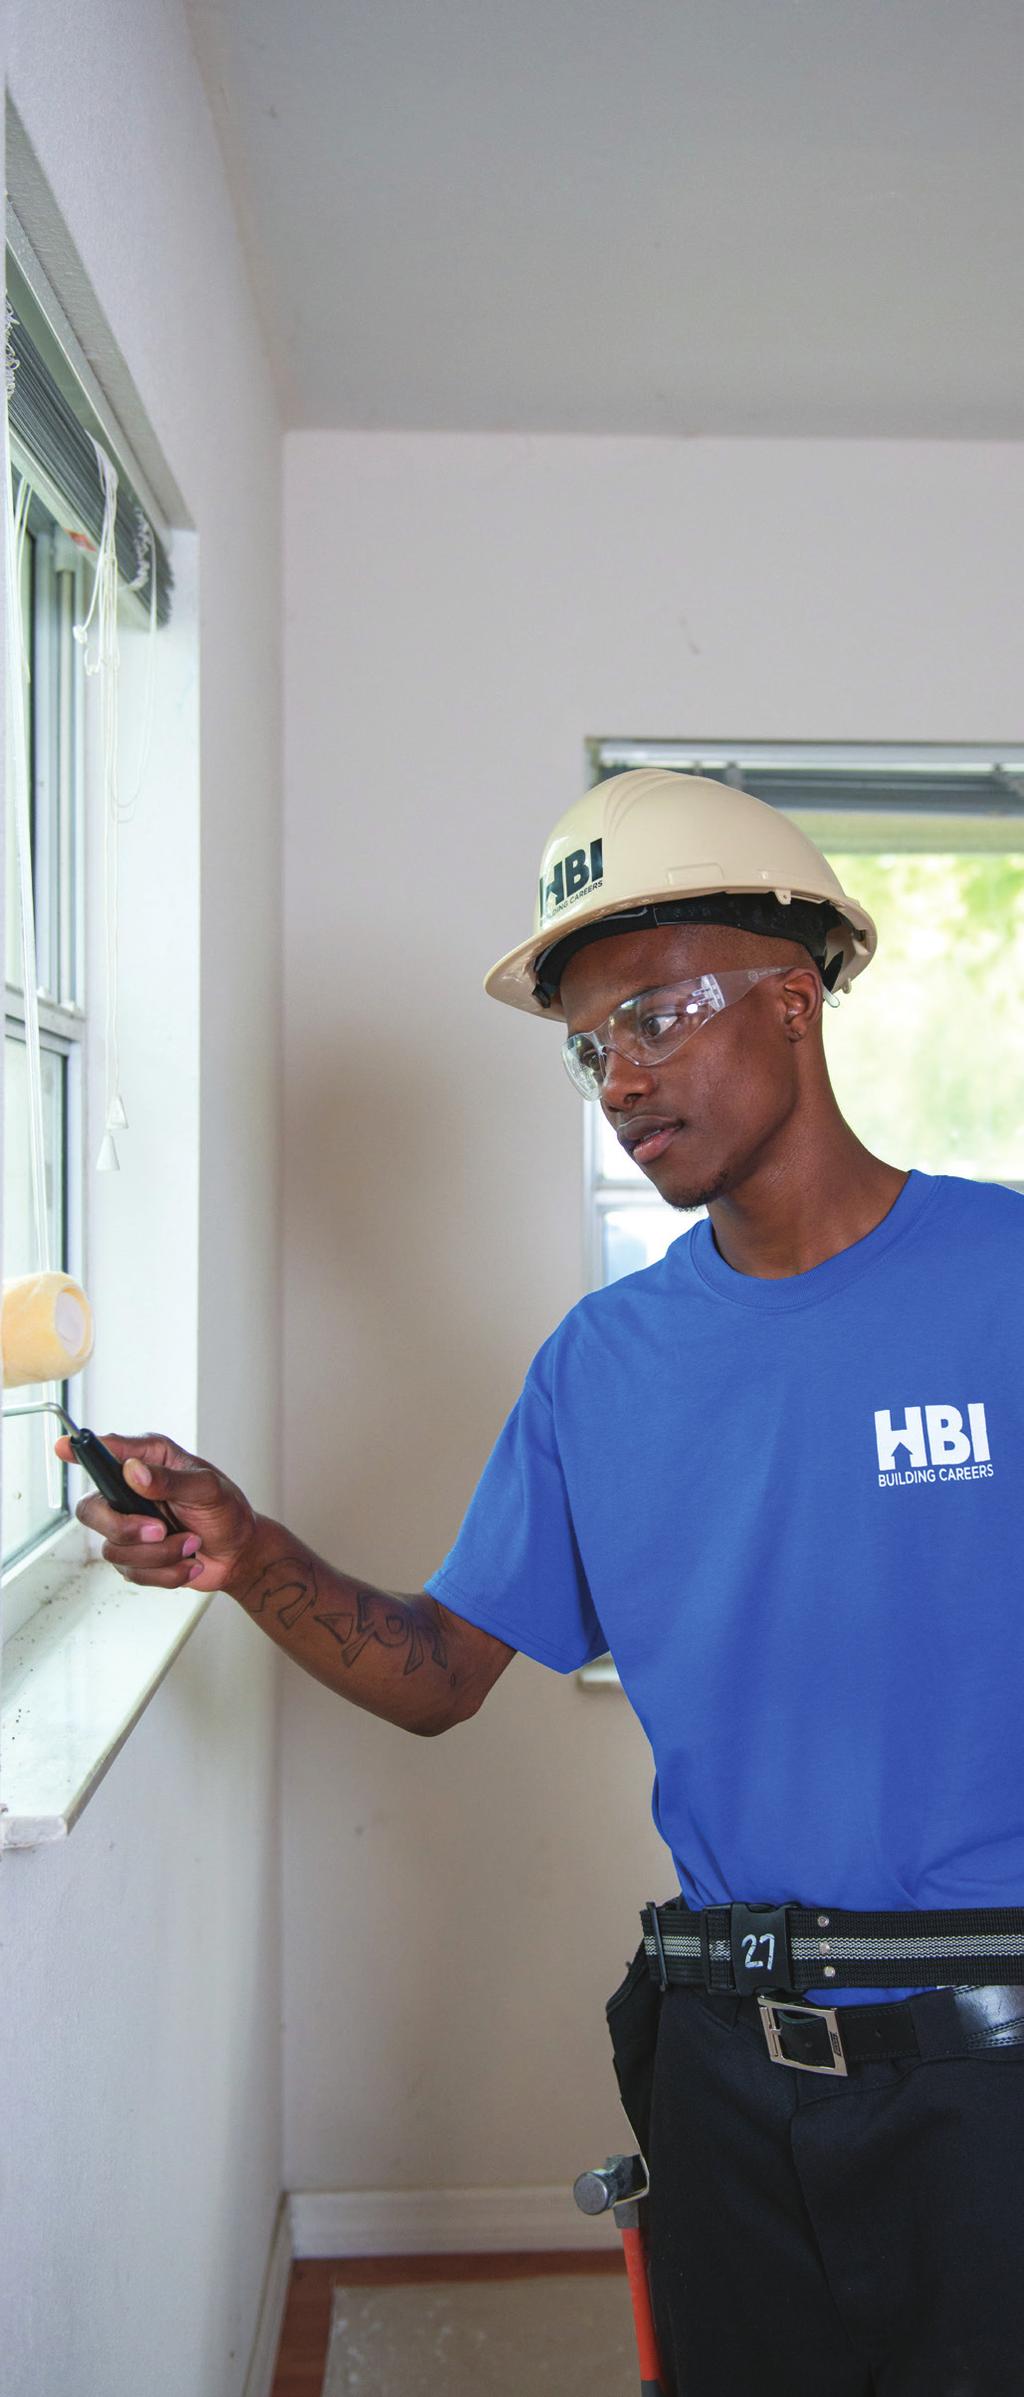 PAINTING Whenever a home is built, nearly all of the interior and some of the exterior surfaces need to be painted to protect them from damage by water, mold and corrosion.